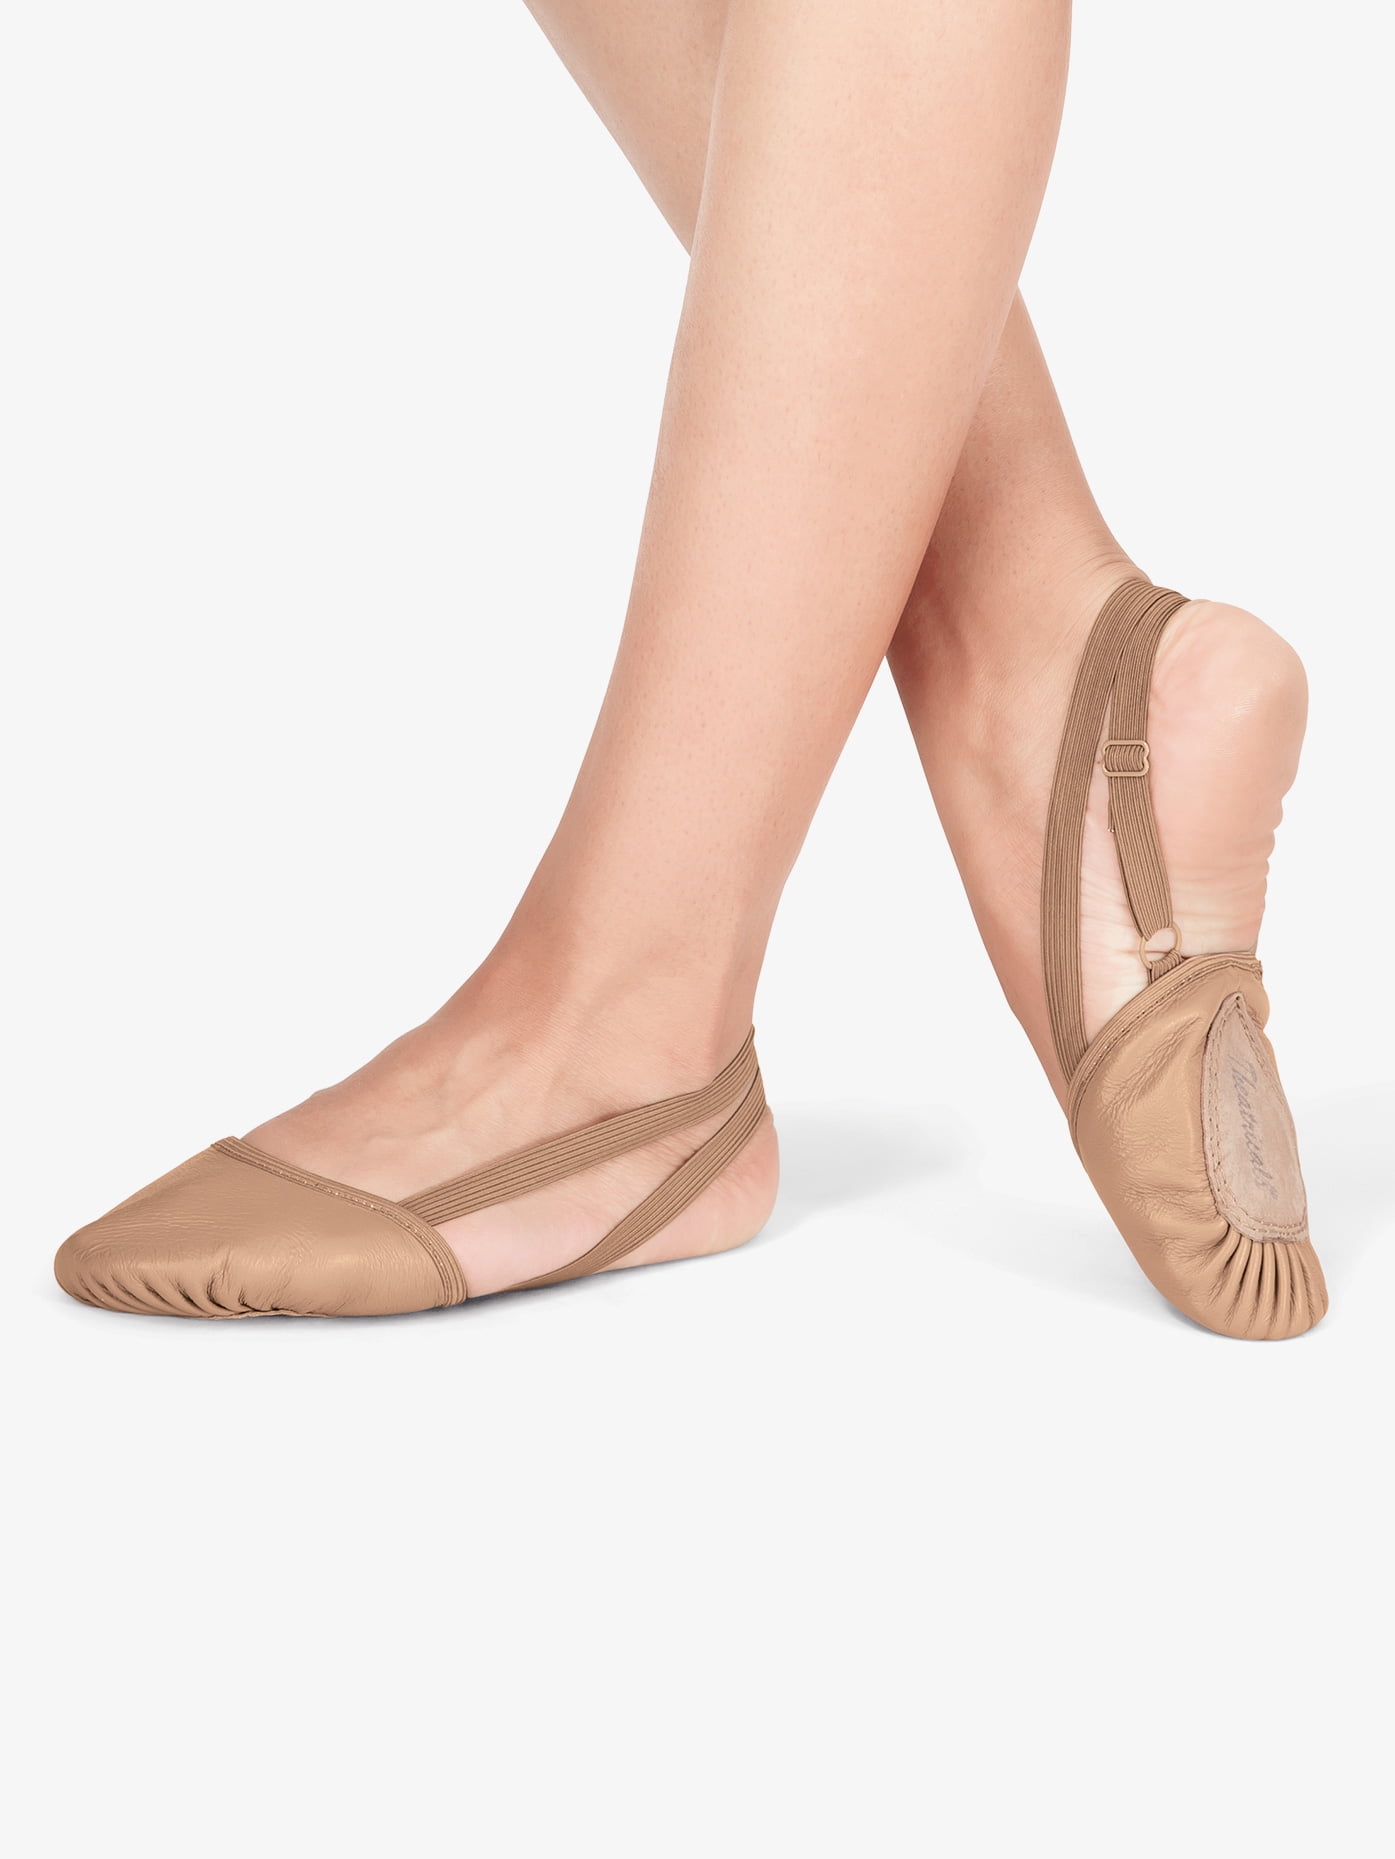 Eurotard Leather Half sole Tan A2062 Lyrical Dance shoes Contemporary New 